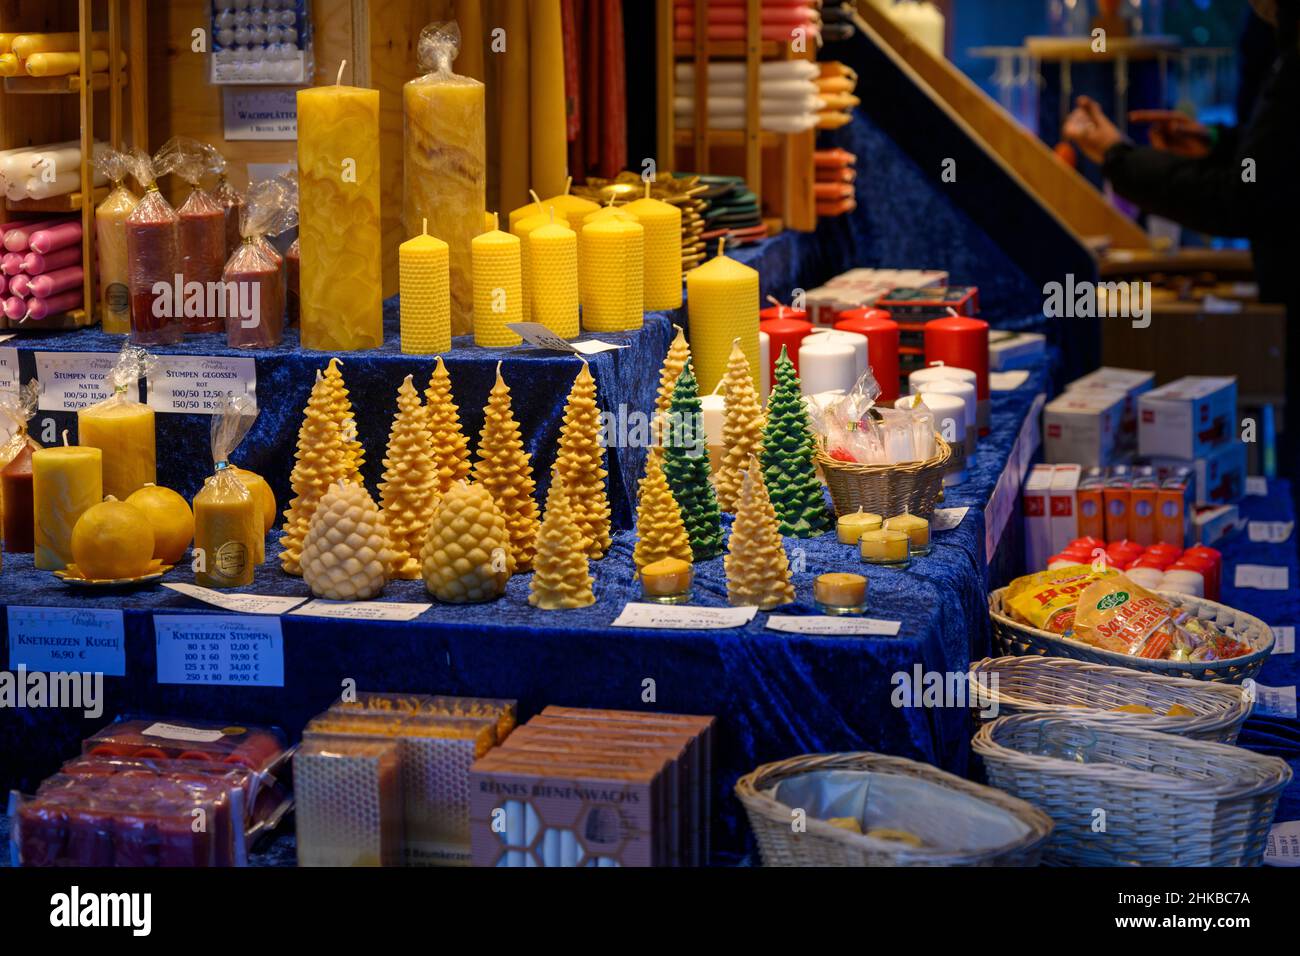 A stall at the Christmas market sells candles in Düsseldorf, NRW, Germany on Dec. 11, 2021. Stock Photo